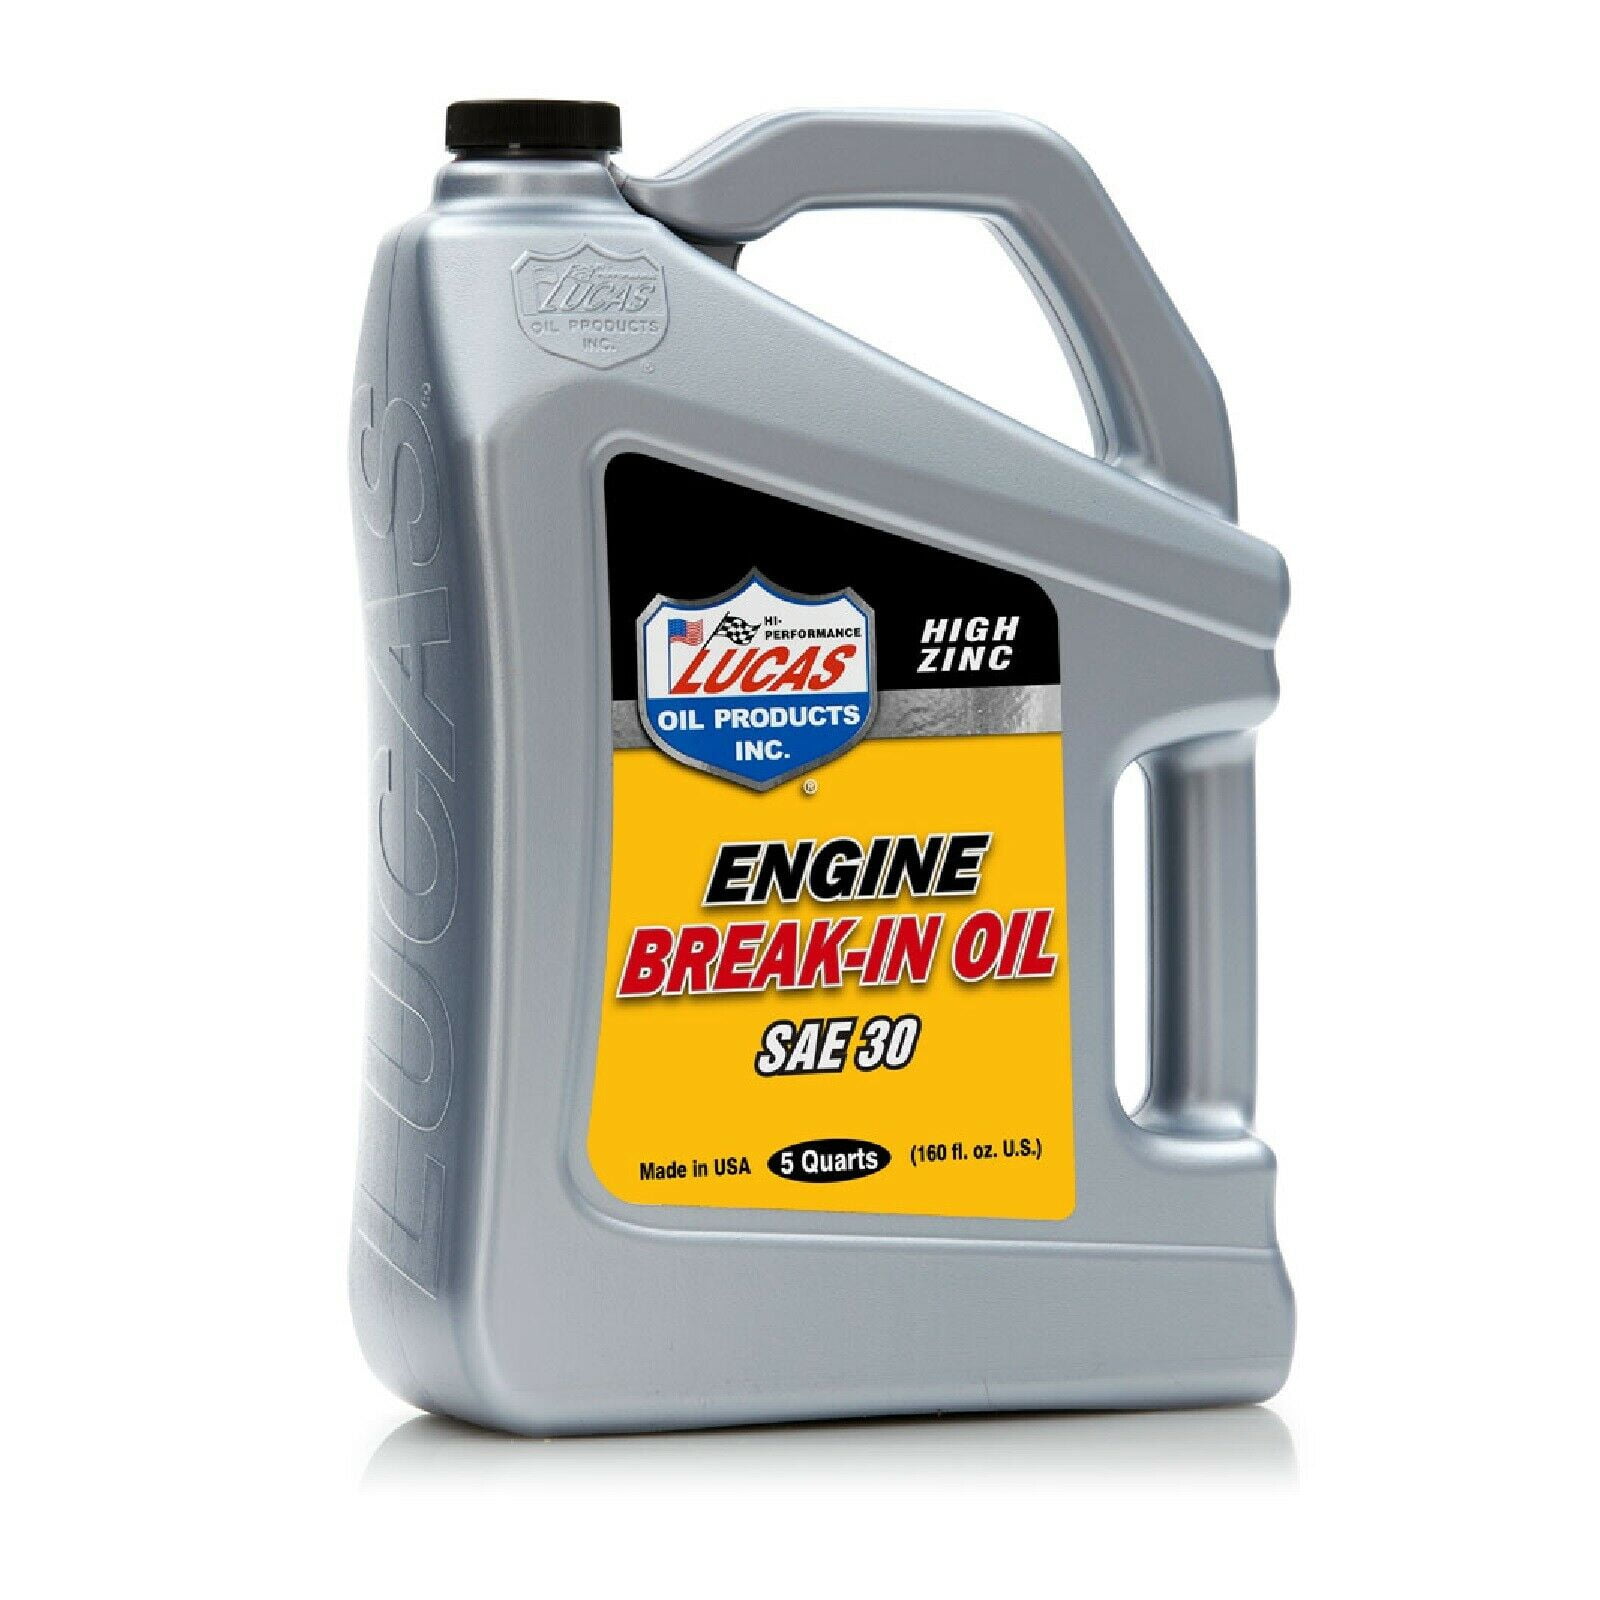 AW Hydraulic Oils – Lucas Oil Products, Inc. – Keep That Engine Alive!